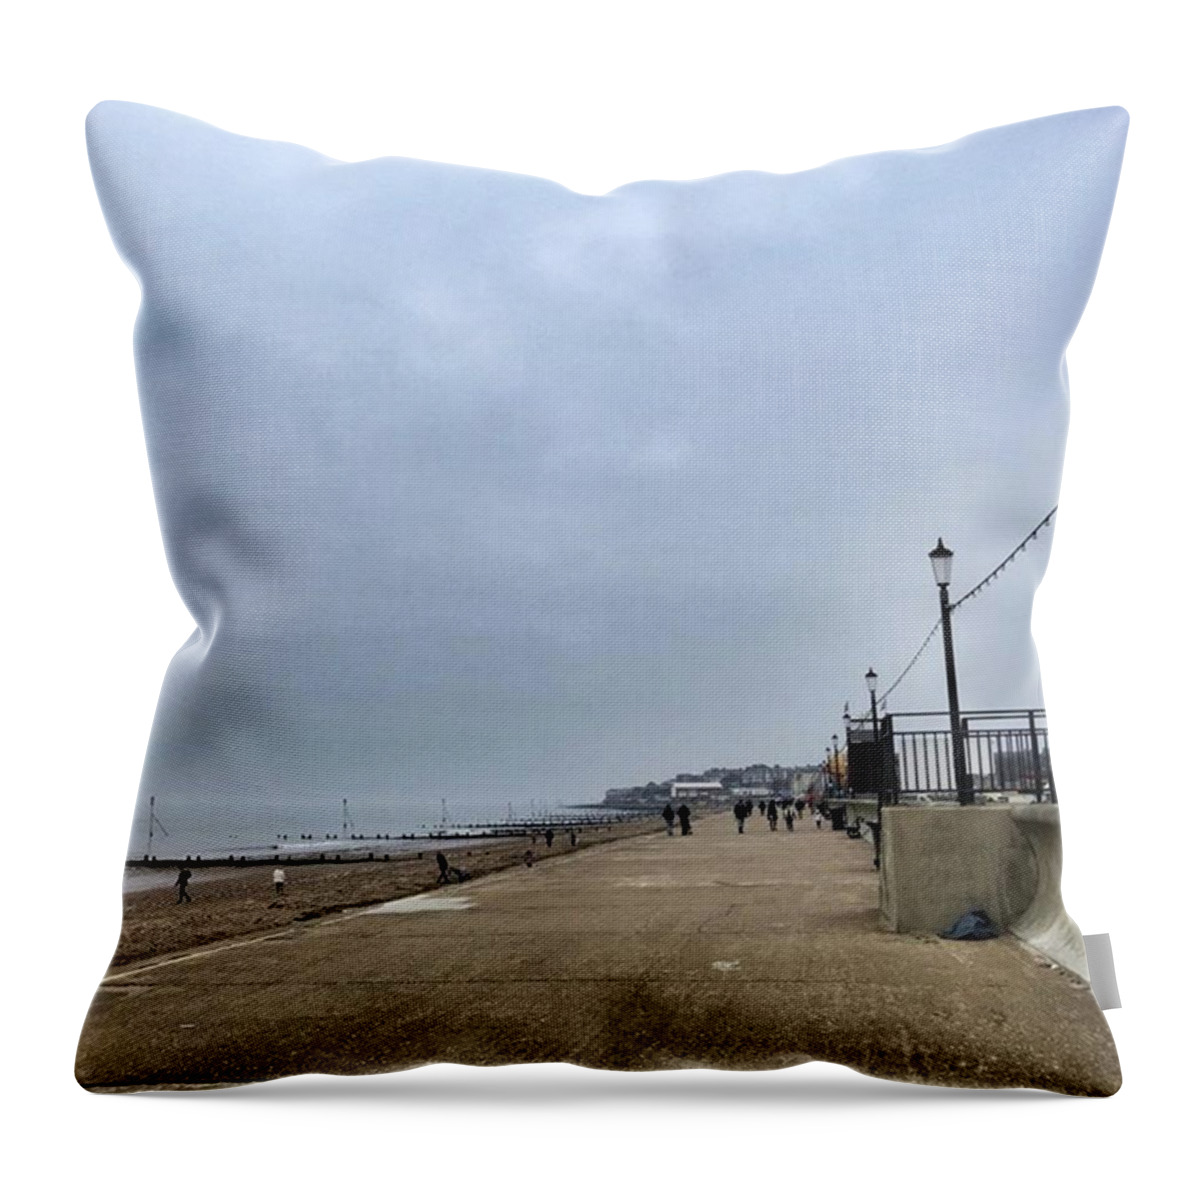 Beautiful Throw Pillow featuring the photograph Hunstanton At 4pm Yesterday As The by John Edwards